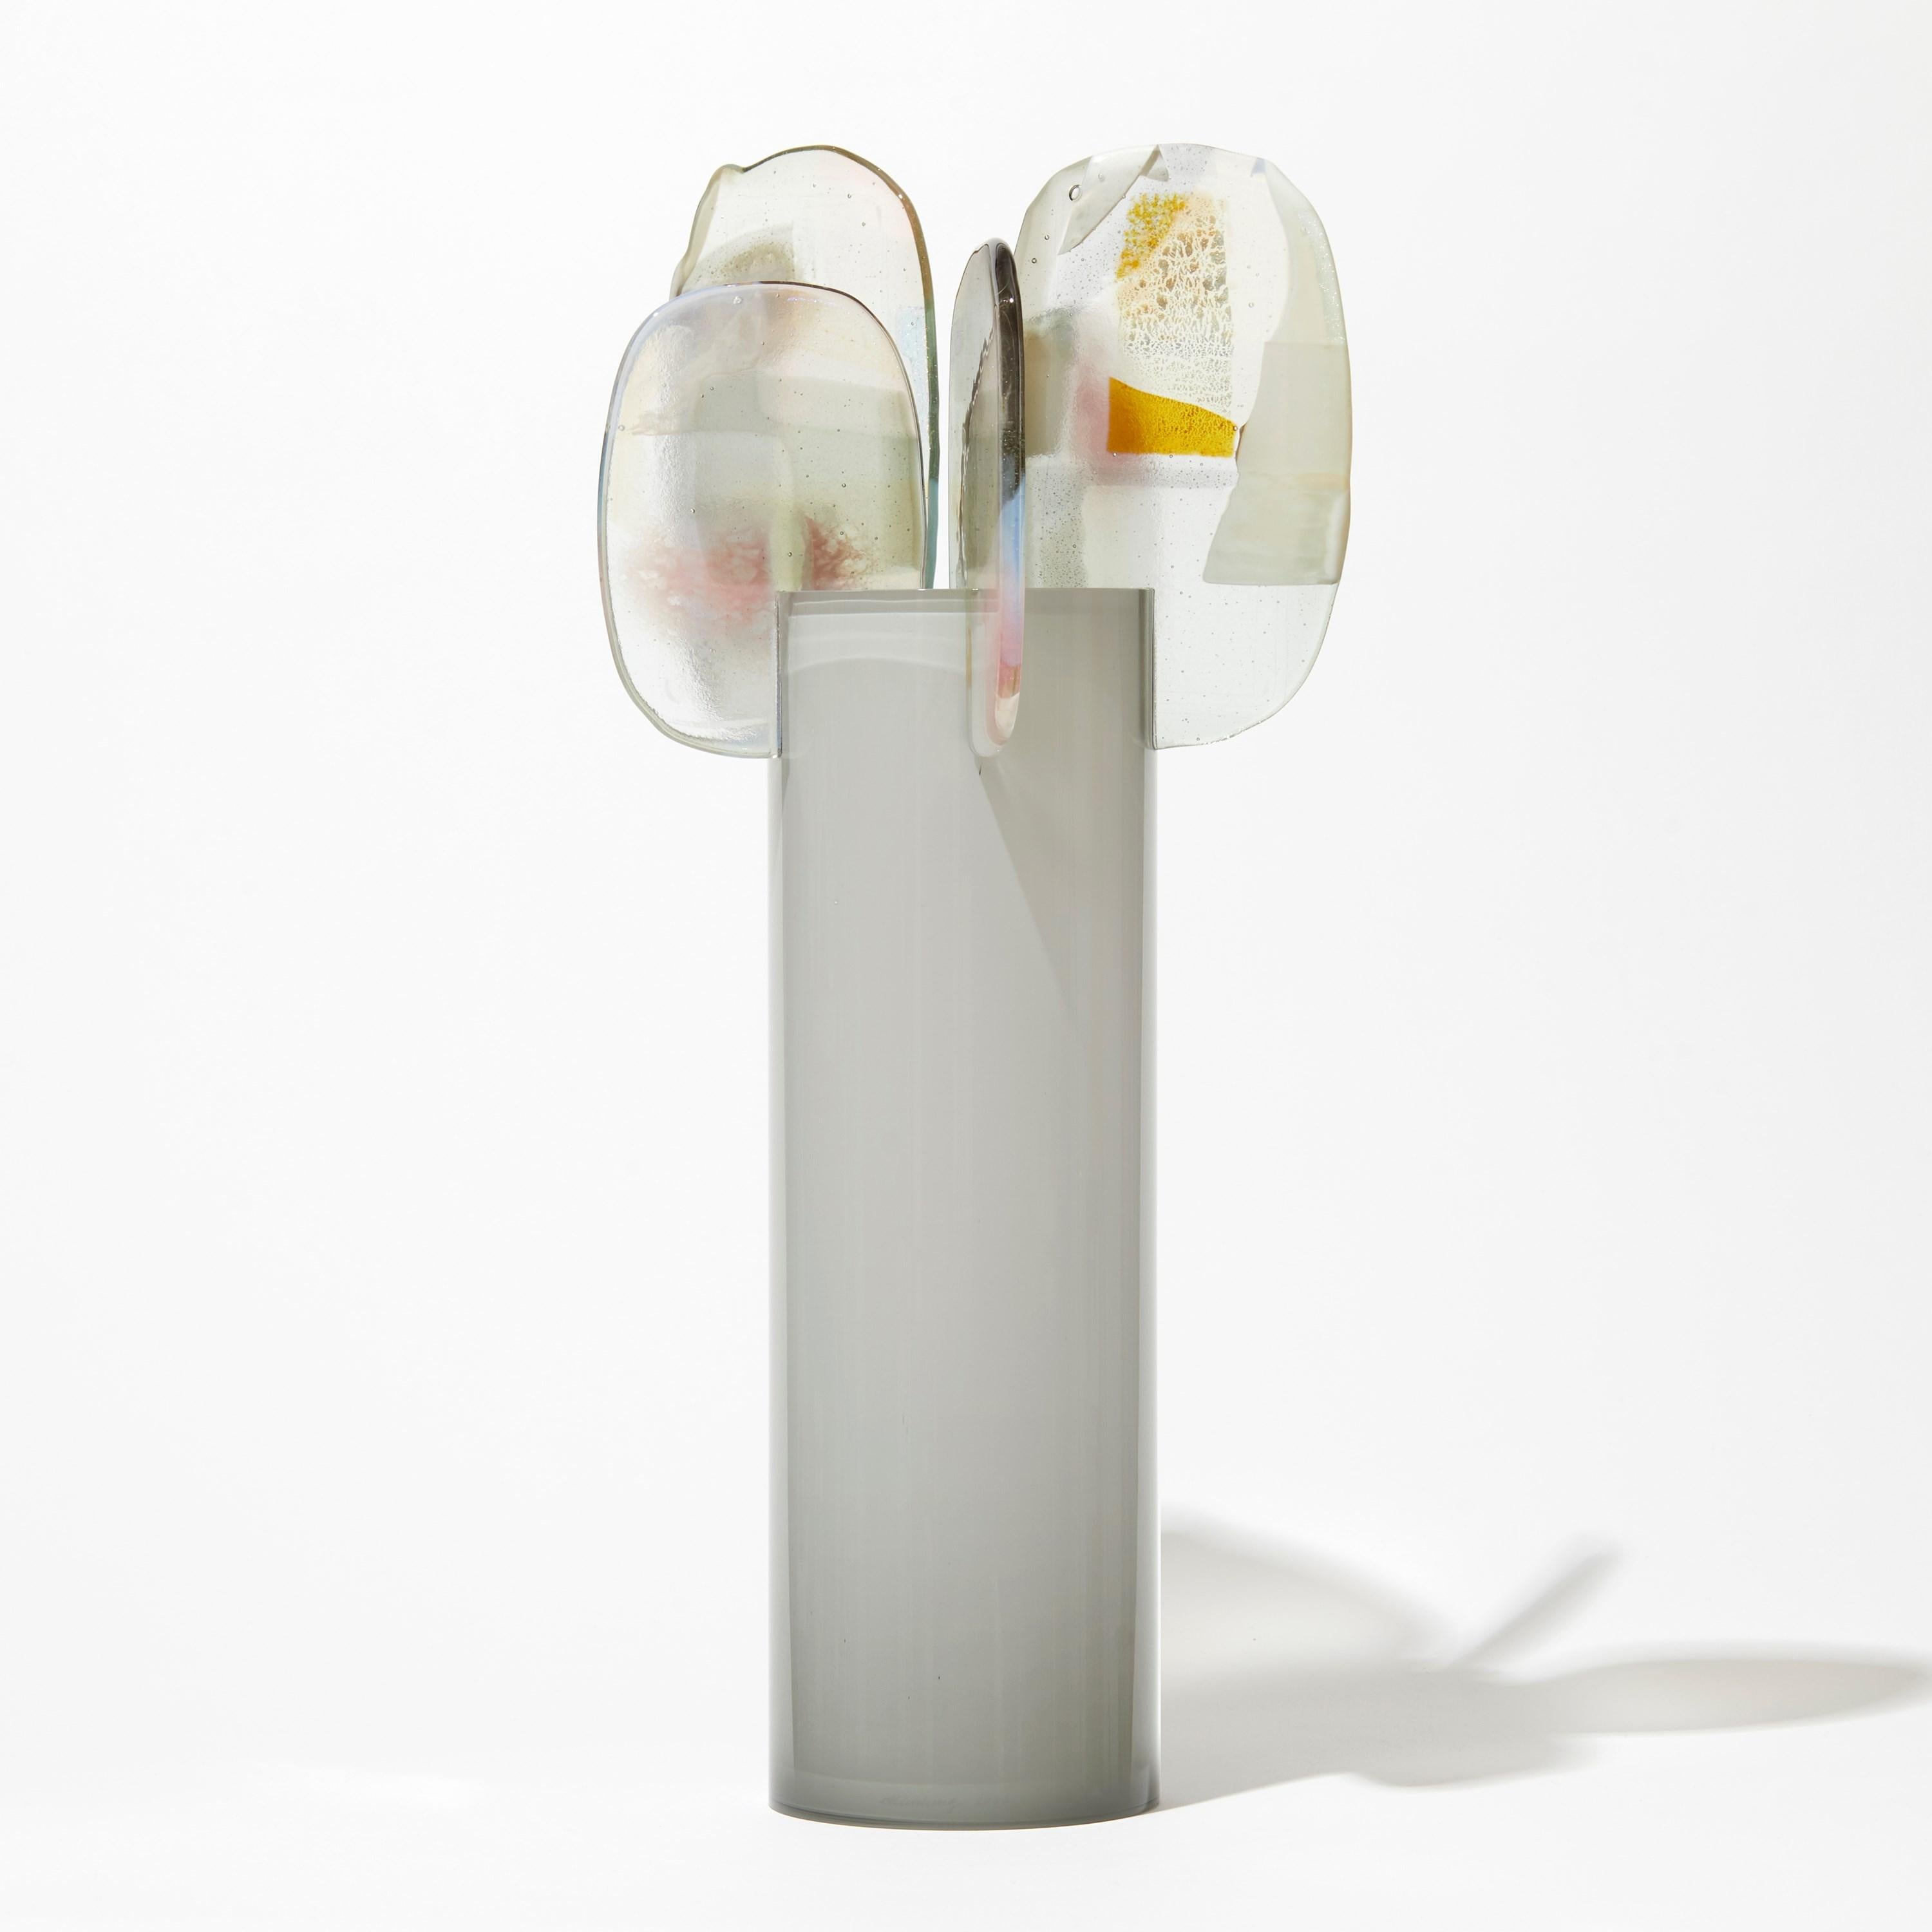 British Paradise 06 in Moonstone, a Soft Grey & Gold Glass Sculpture by Amy Cushing For Sale